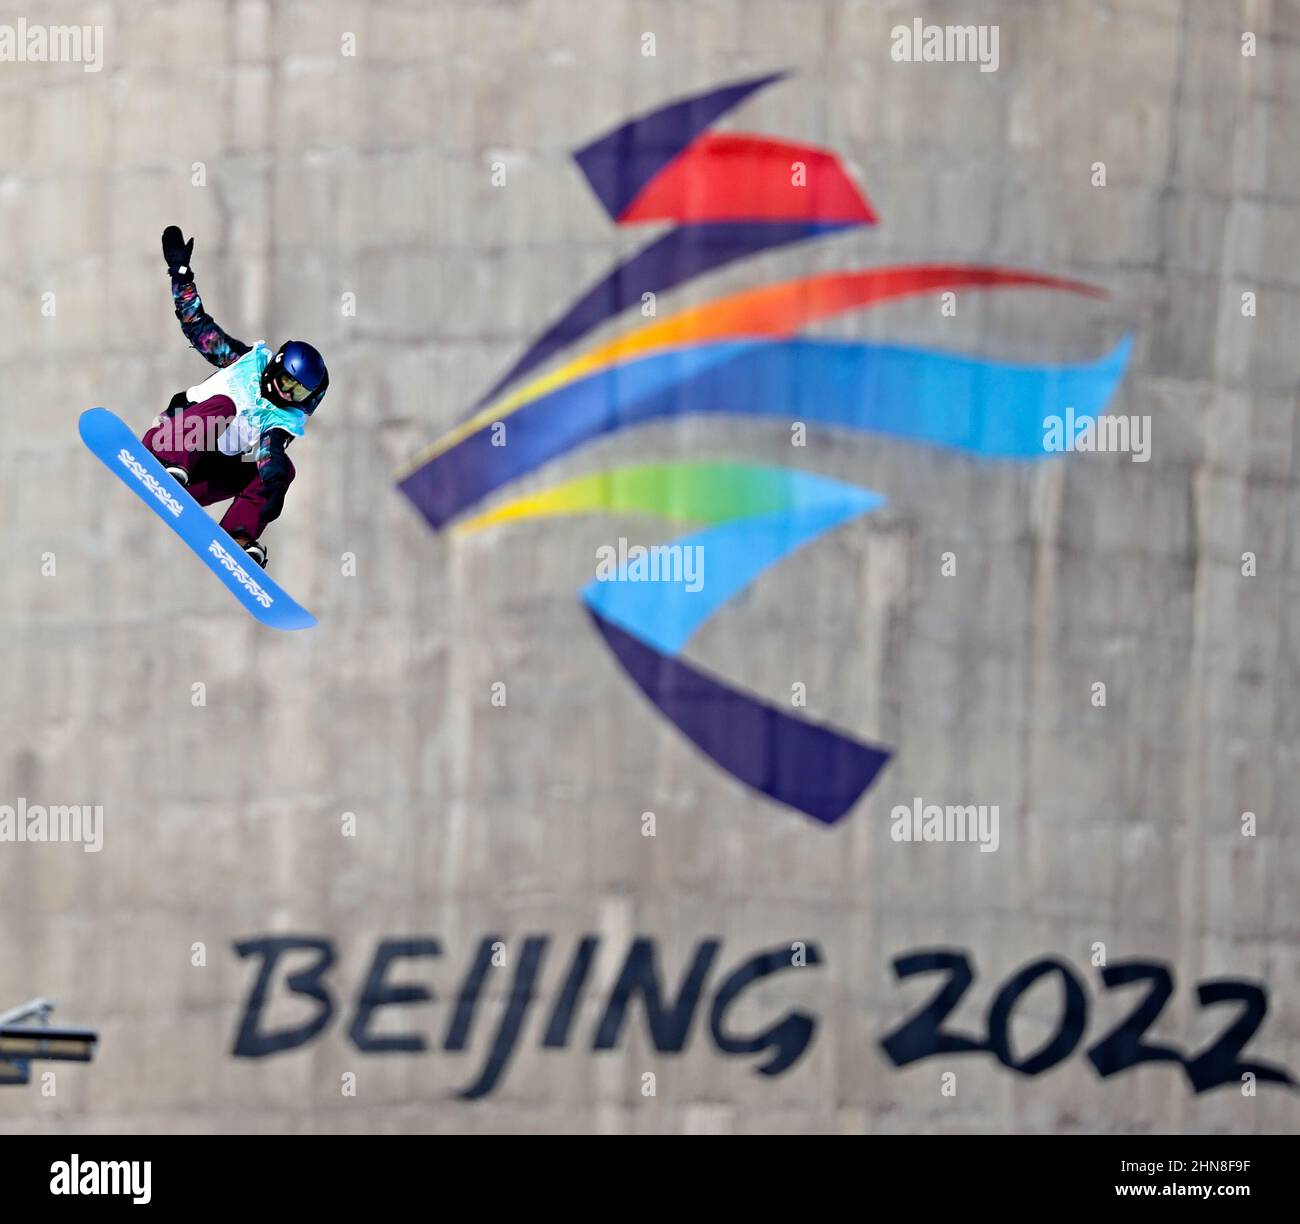 ZHANGJIAKOU, CHINA - FEBRUARY 15: Melissa Peperkamp of the Netherlands competing at the Big Air Final during the Beijing 2022 Olympic Games at the Genting Snow Park P & X Stadium on February 15, 2022 in Zhangjiakou, China (Photo by Iris van den Broek/Orange Pictures) NOCNSF Stock Photo